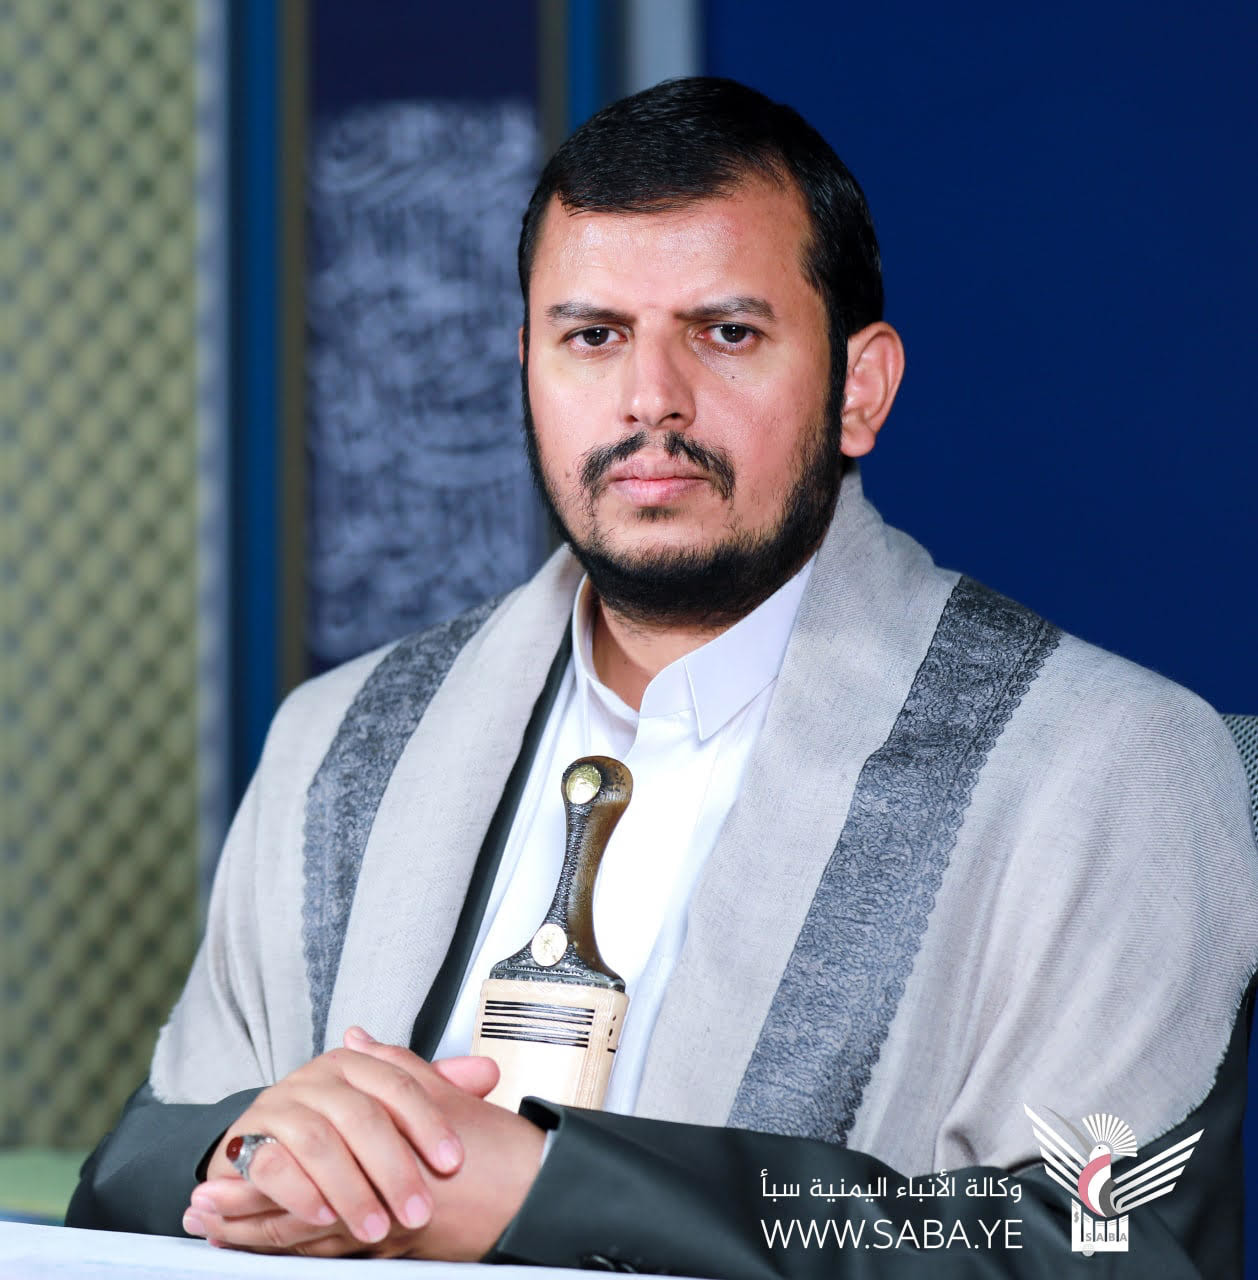 Leader of Revolution: the Yemeni people's celebration of al-Welayah Day comes from their faith heritage